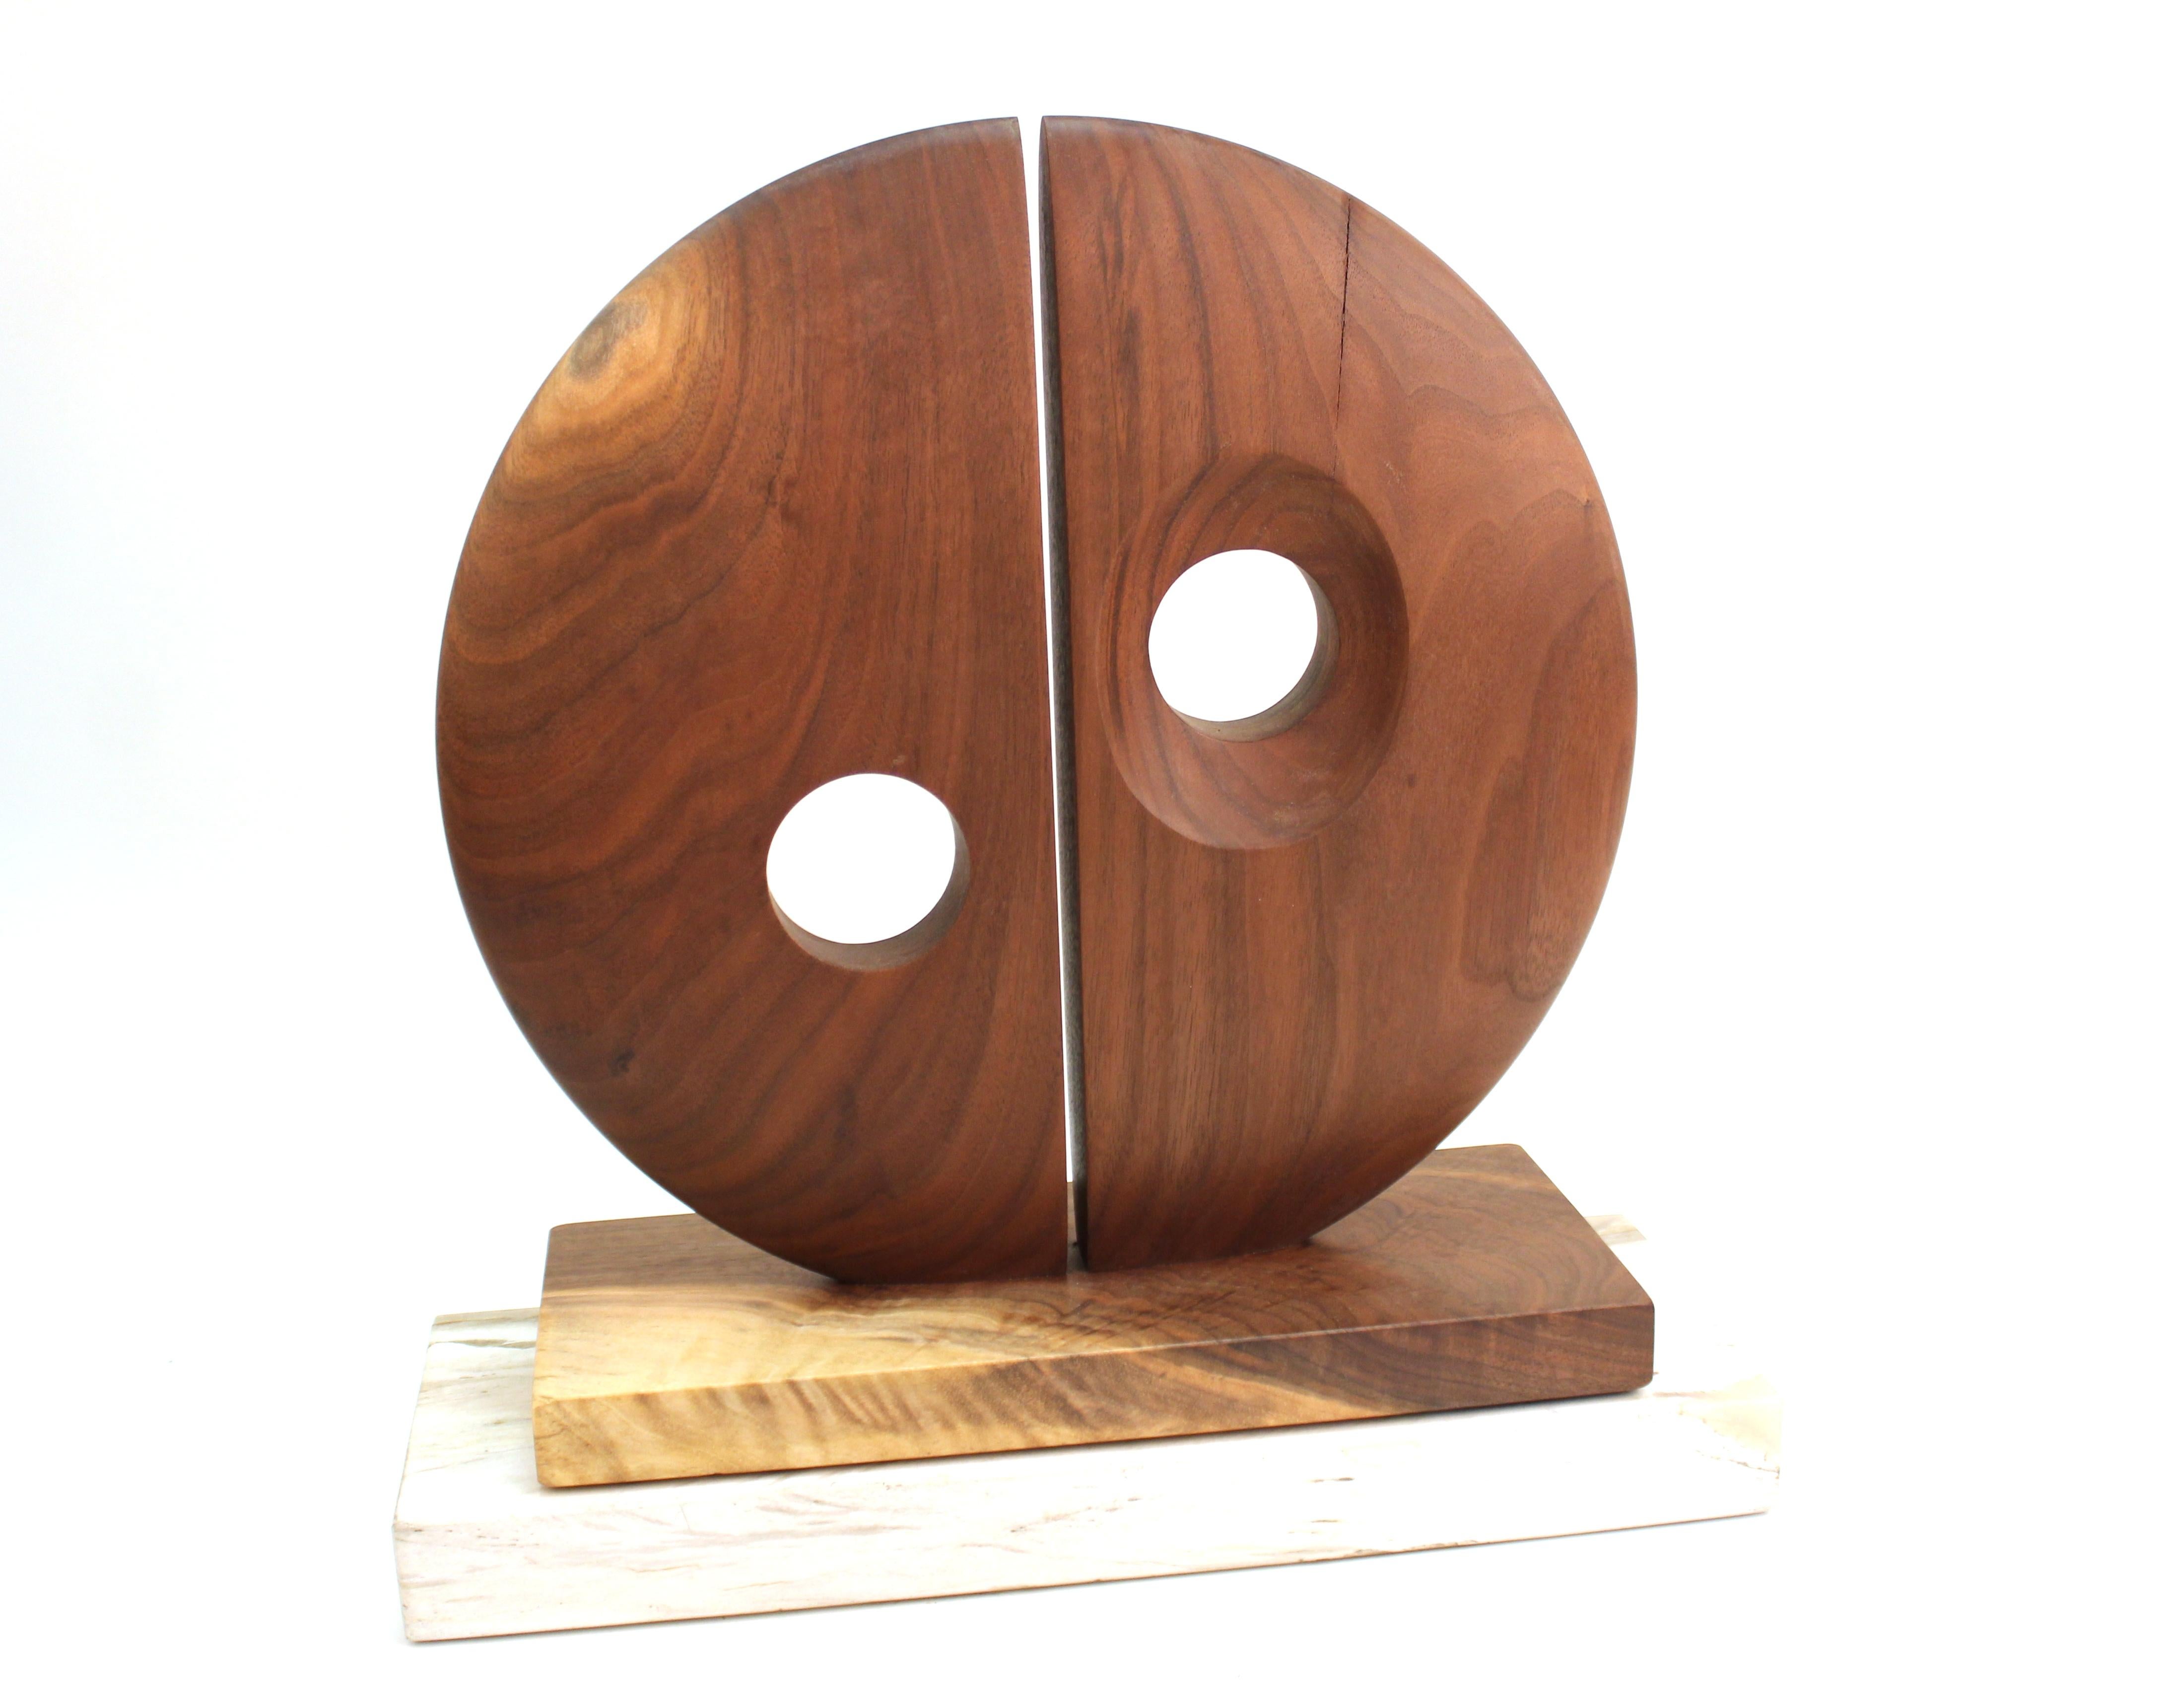 Stone Modern Abstract Carved Wood Tabletop Sculpture with Bisected Disc